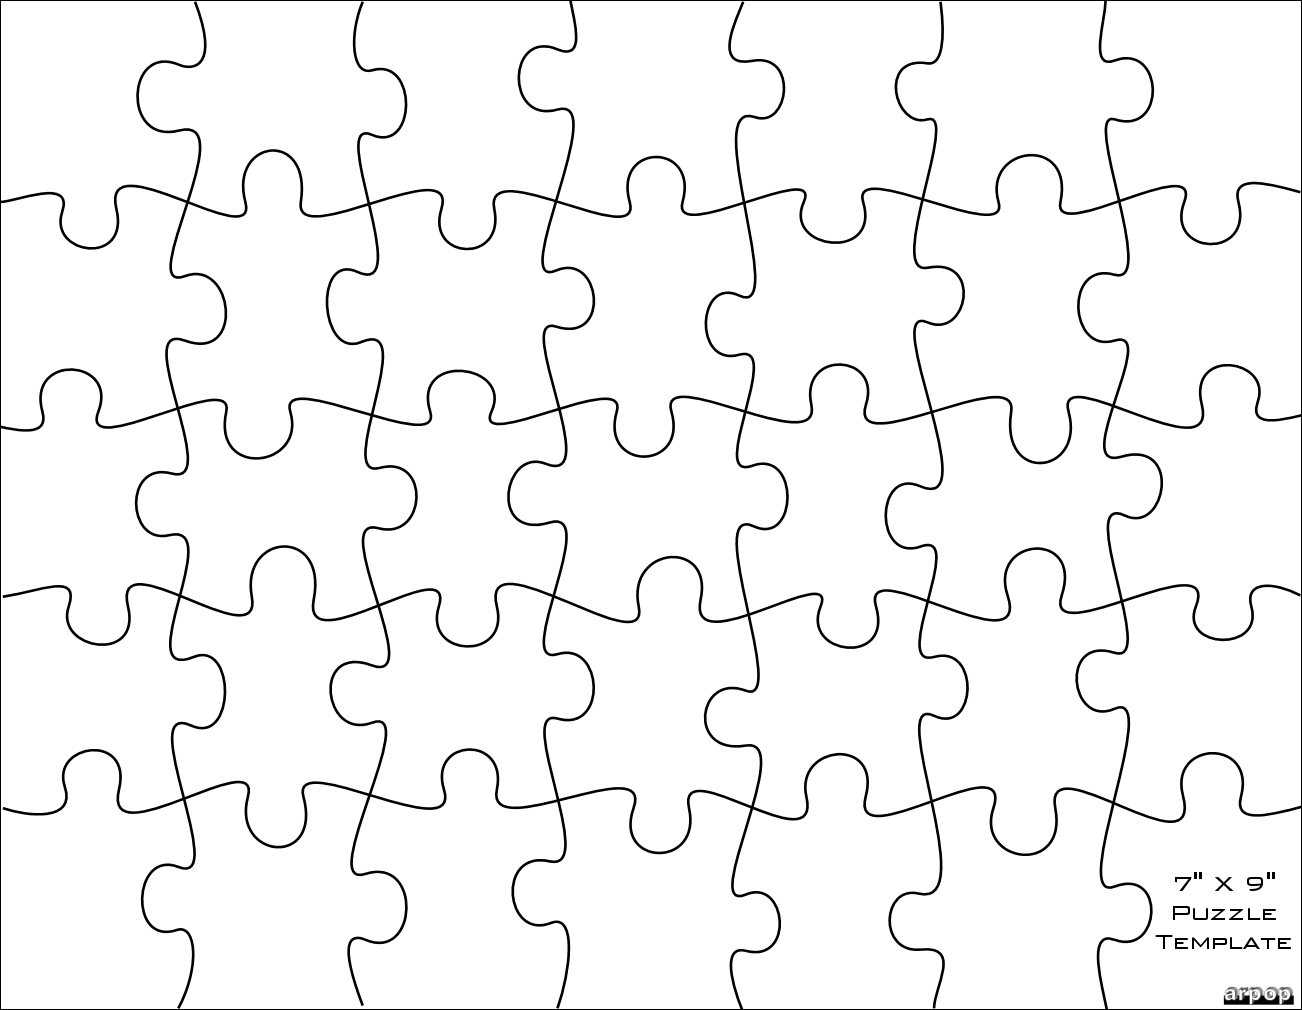 Free Puzzle Pieces Template, Download Free Clip Art, Free Throughout Jigsaw Puzzle Template For Word